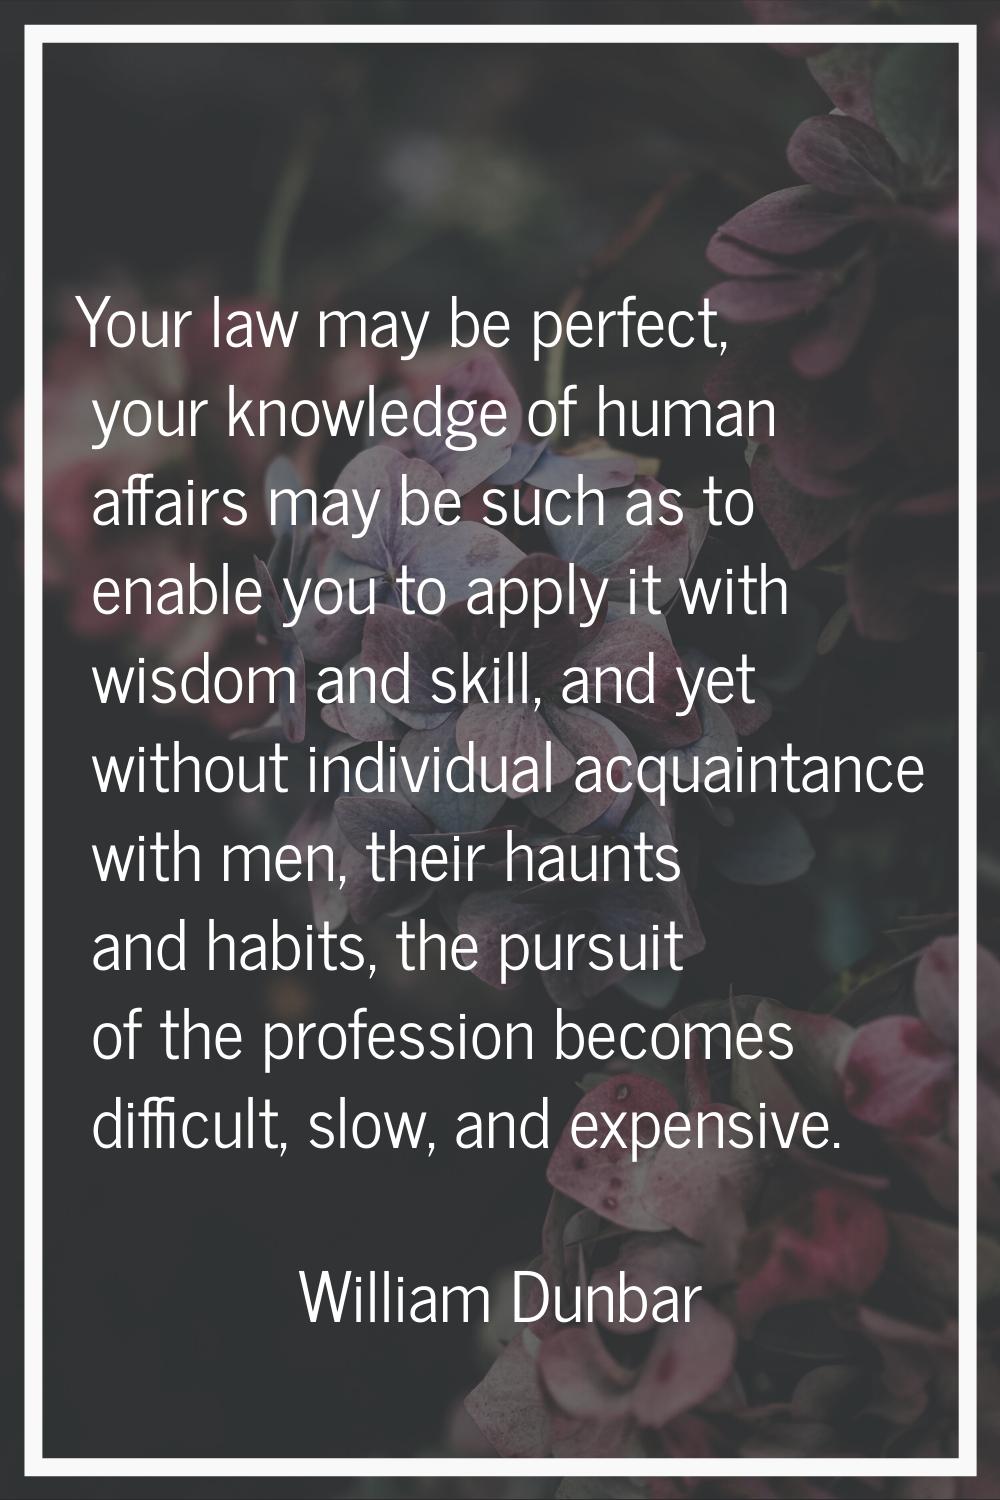 Your law may be perfect, your knowledge of human affairs may be such as to enable you to apply it w